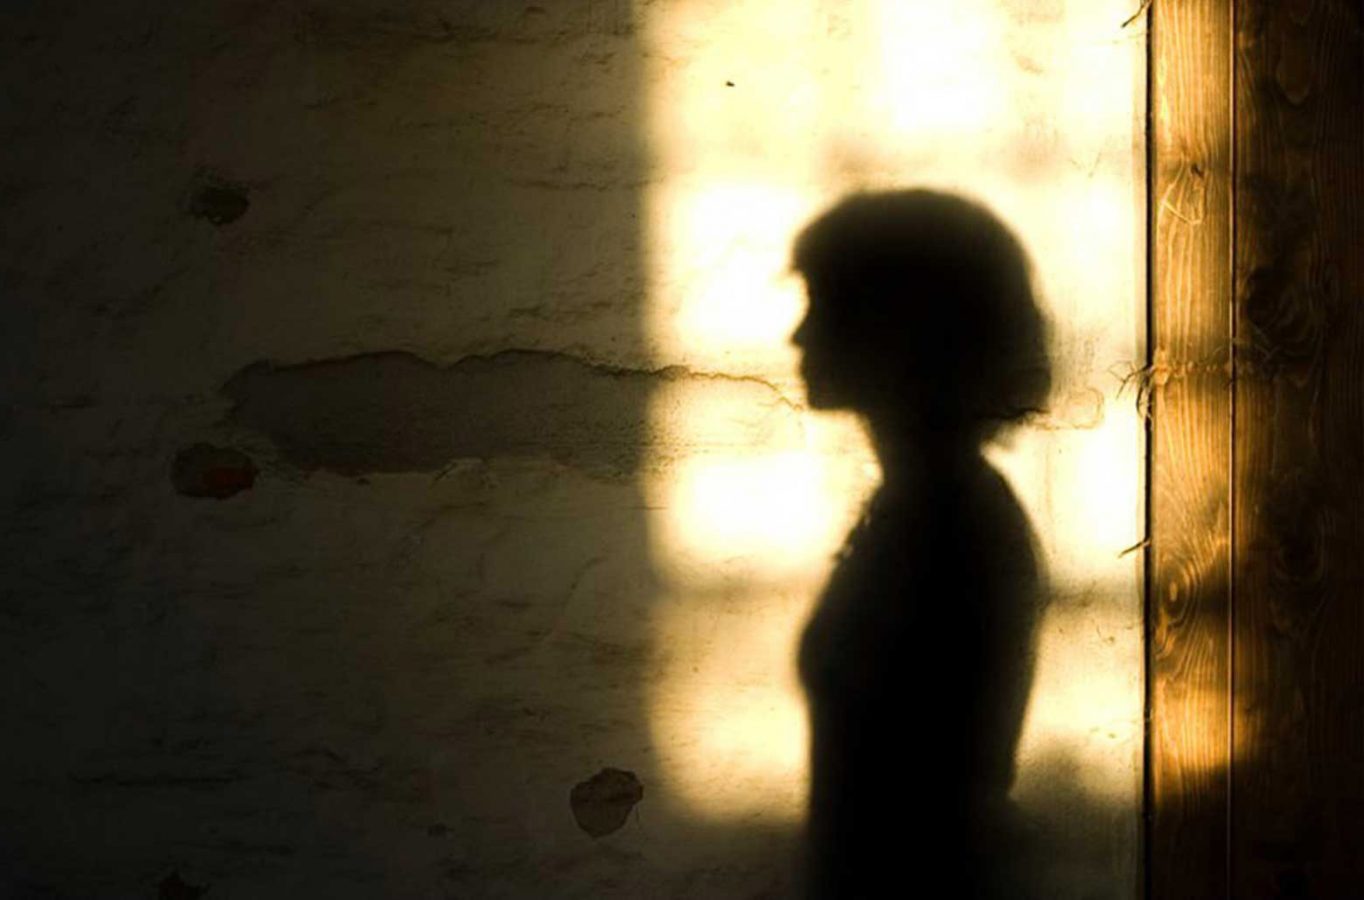 The silhouette of a women against light background.